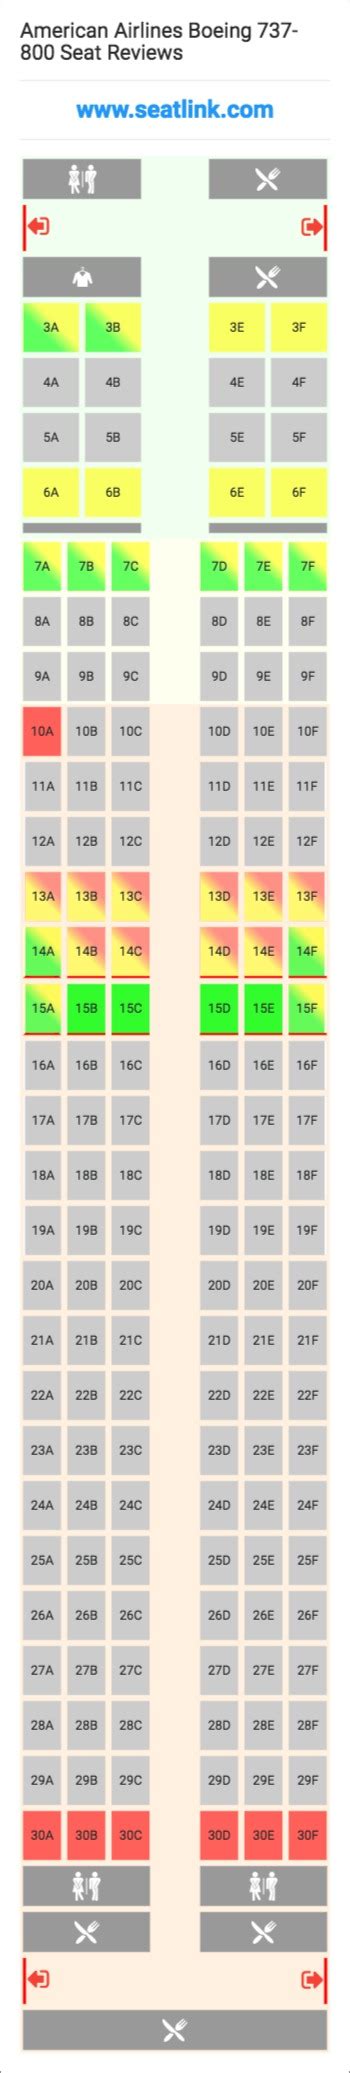 boeing 737 seating chart american airlines